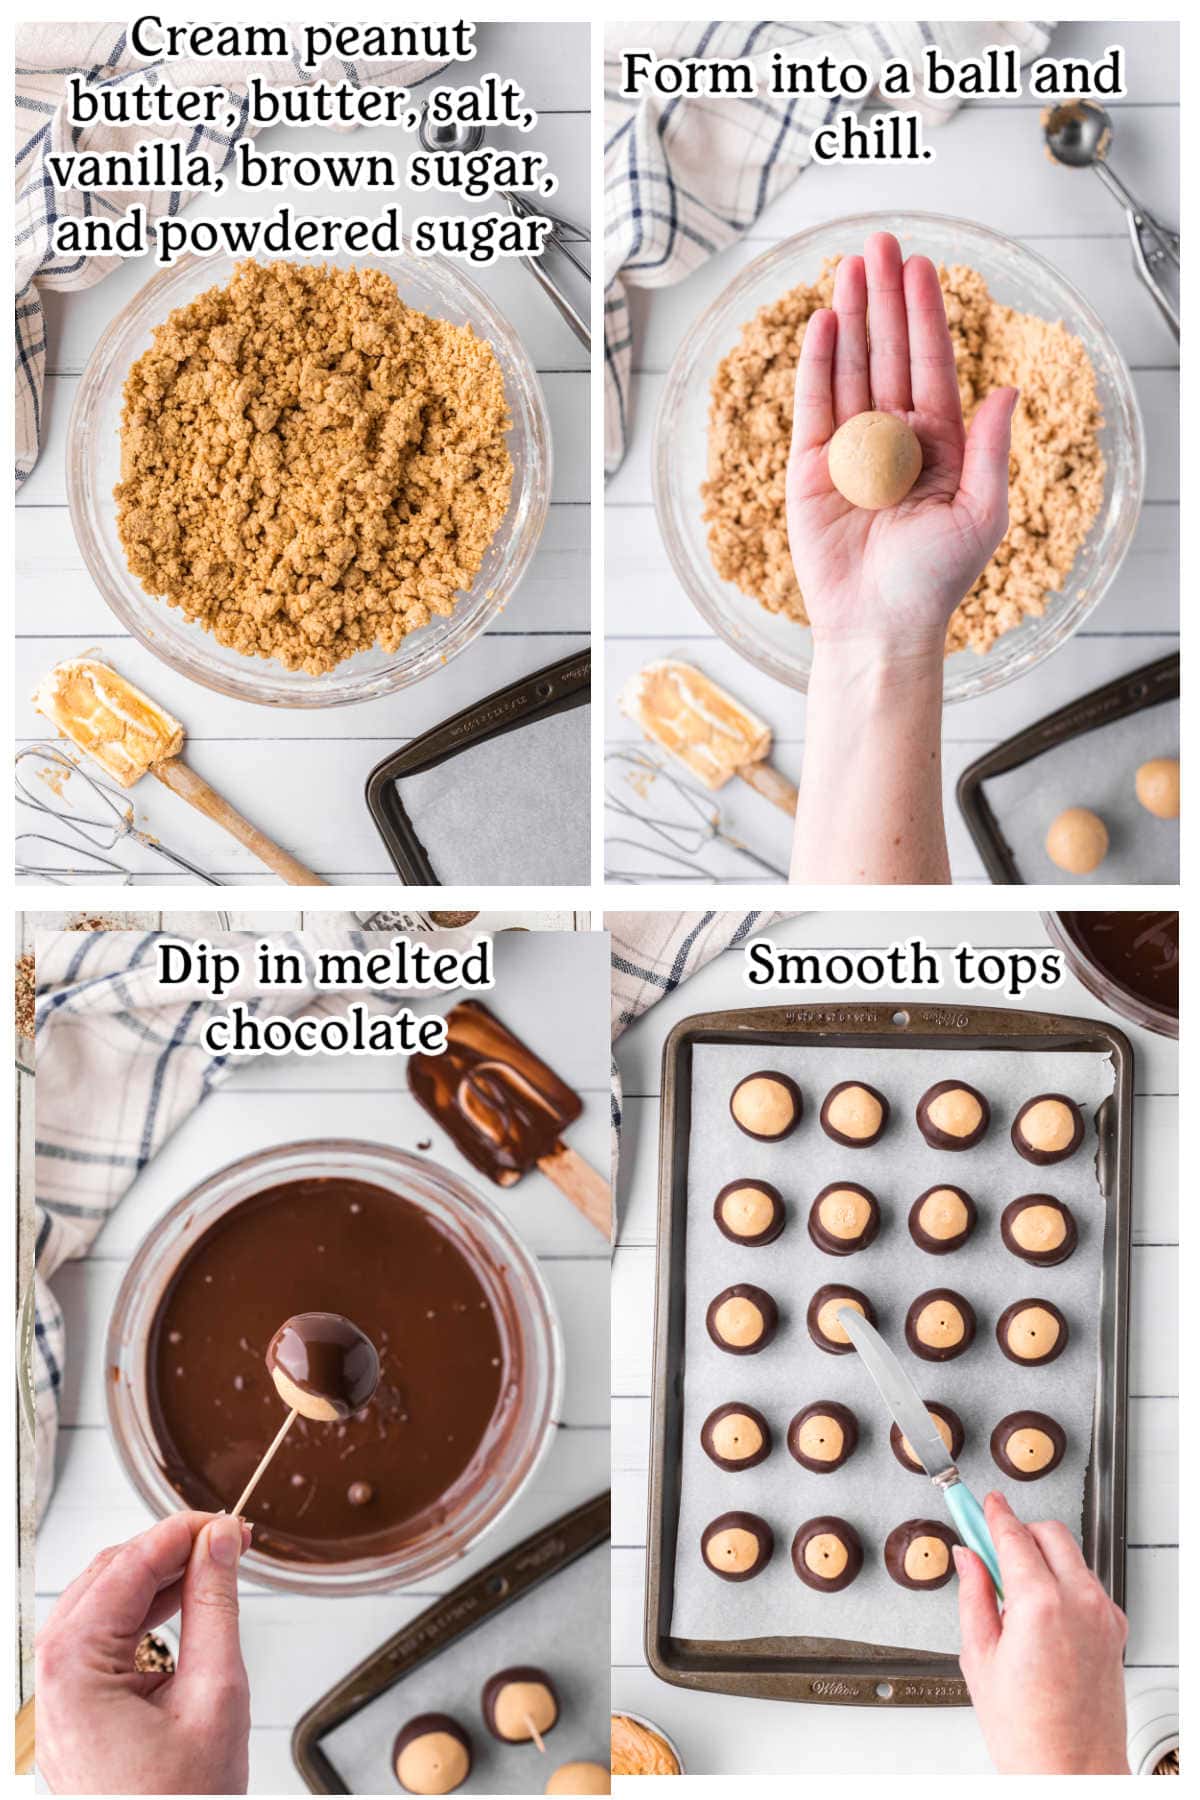 Four overhead images with text overlay illustrating the main recipe steps. 